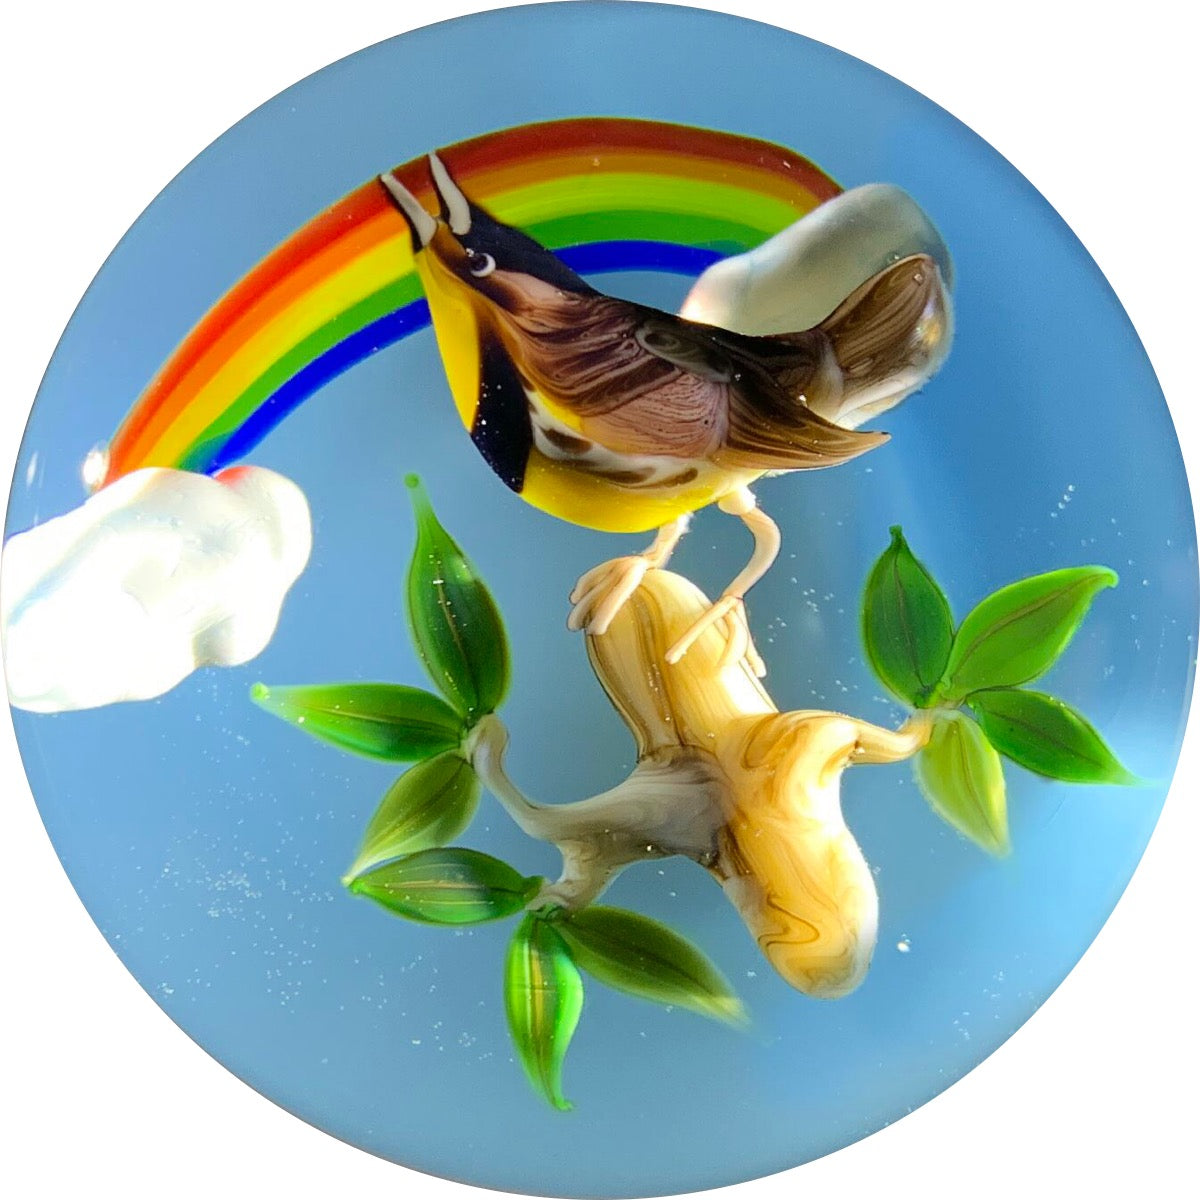 Rick Ayotte 1980 Lampwork Songbird with Rainbow on Blue LE 21/50